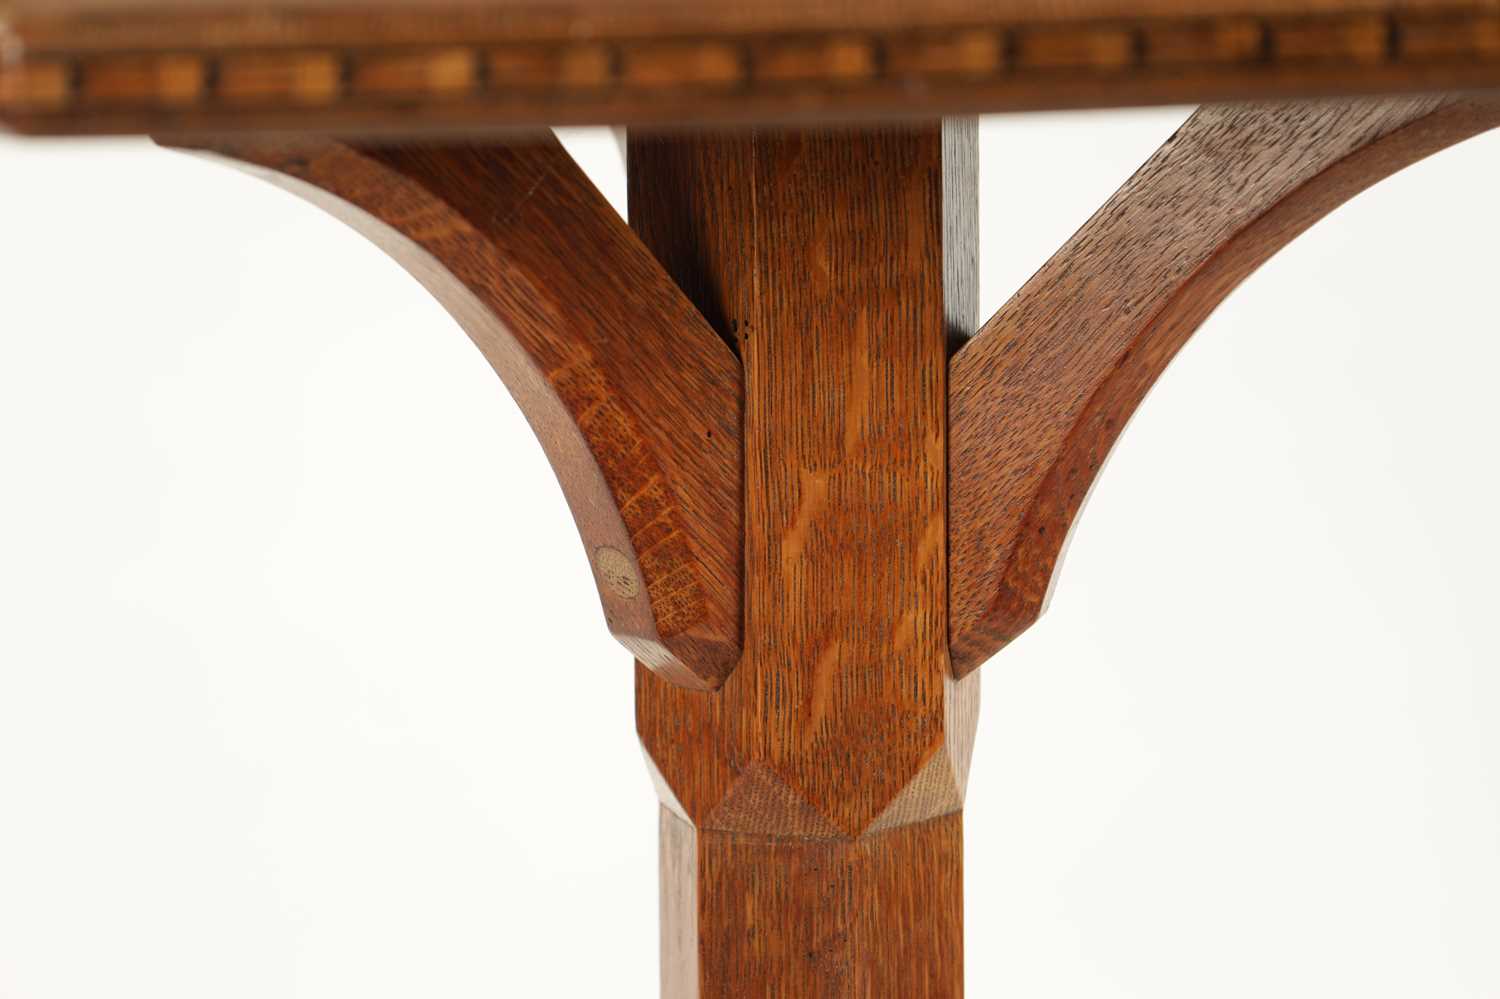 AN EARLY 20TH CENTURY AESTHETIC PERIOD OCTAGONAL PUGINESQUE INLAID OAK OCCASIONAL TABLE - Image 6 of 6